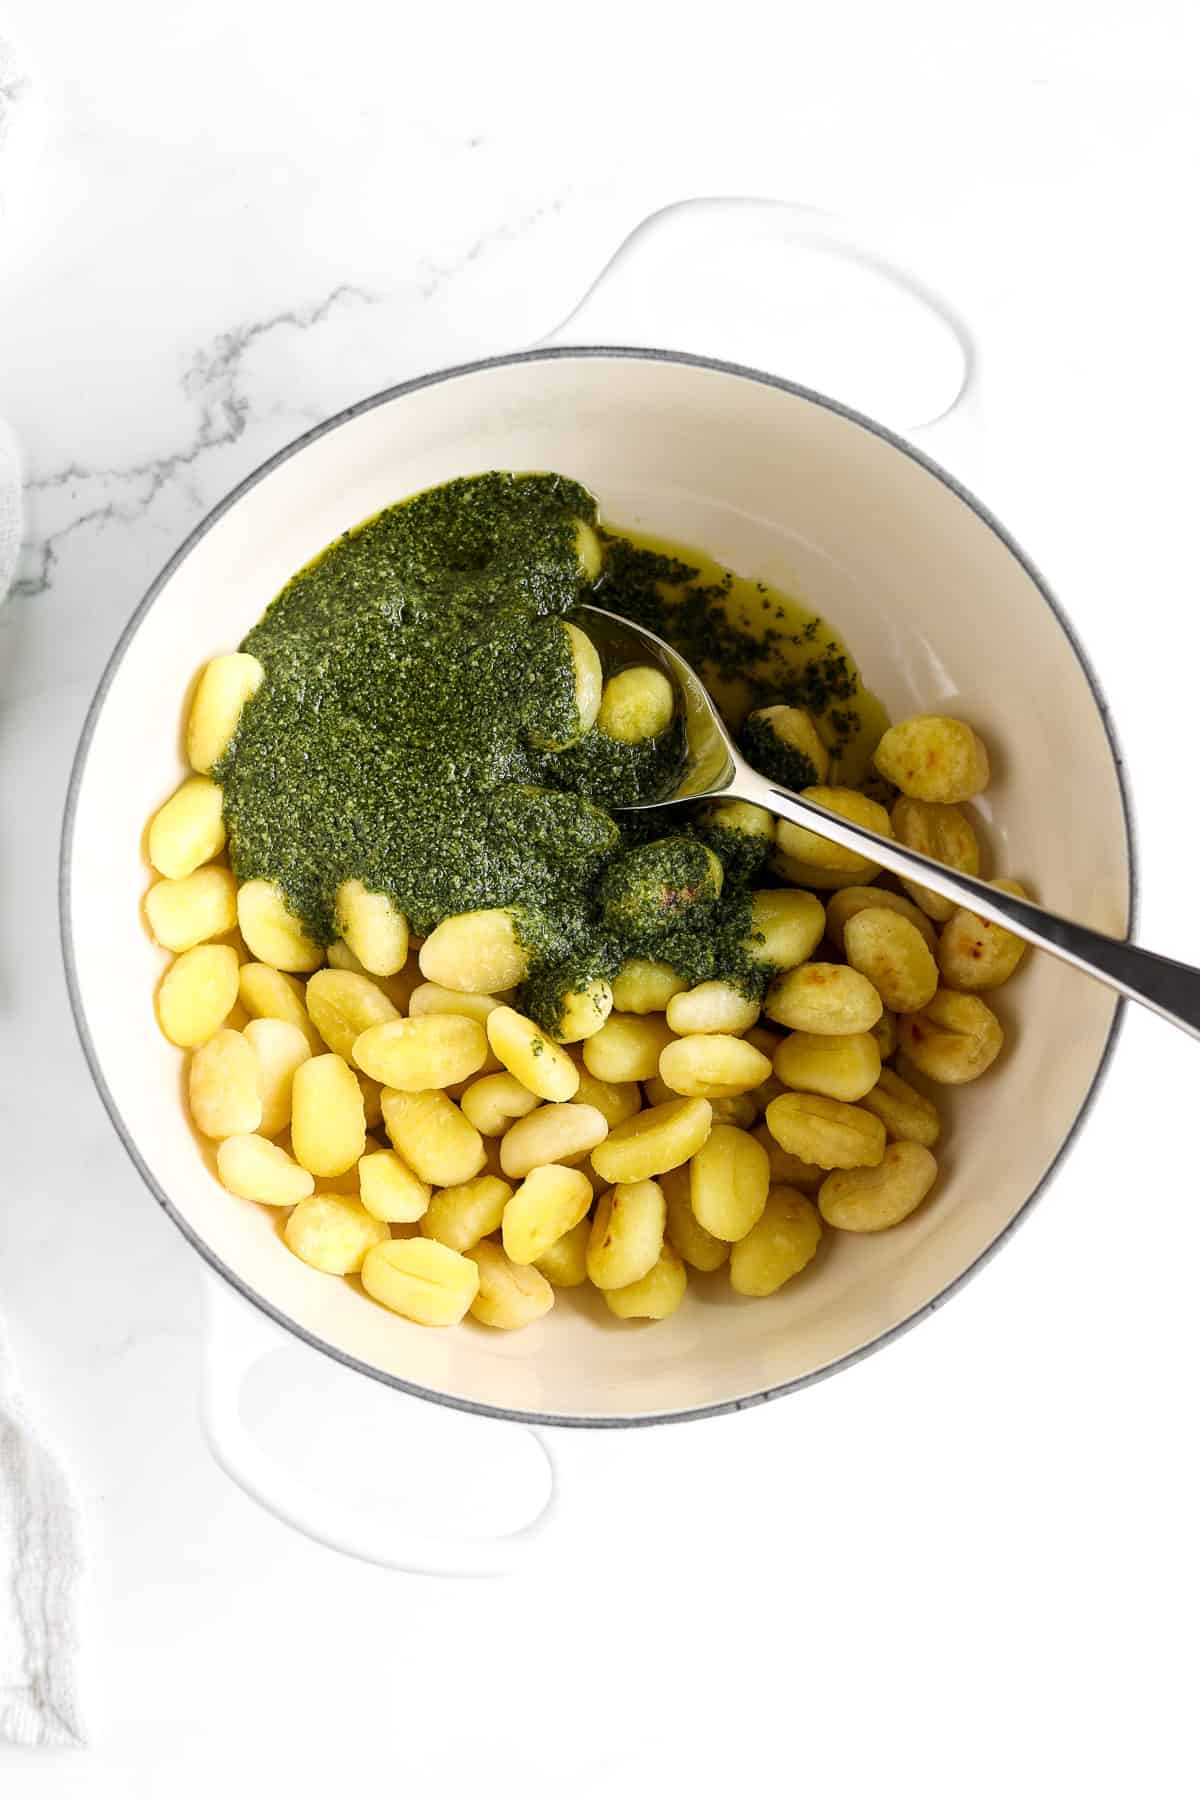 Toasted gnocchi topped with homemade basil pesto.